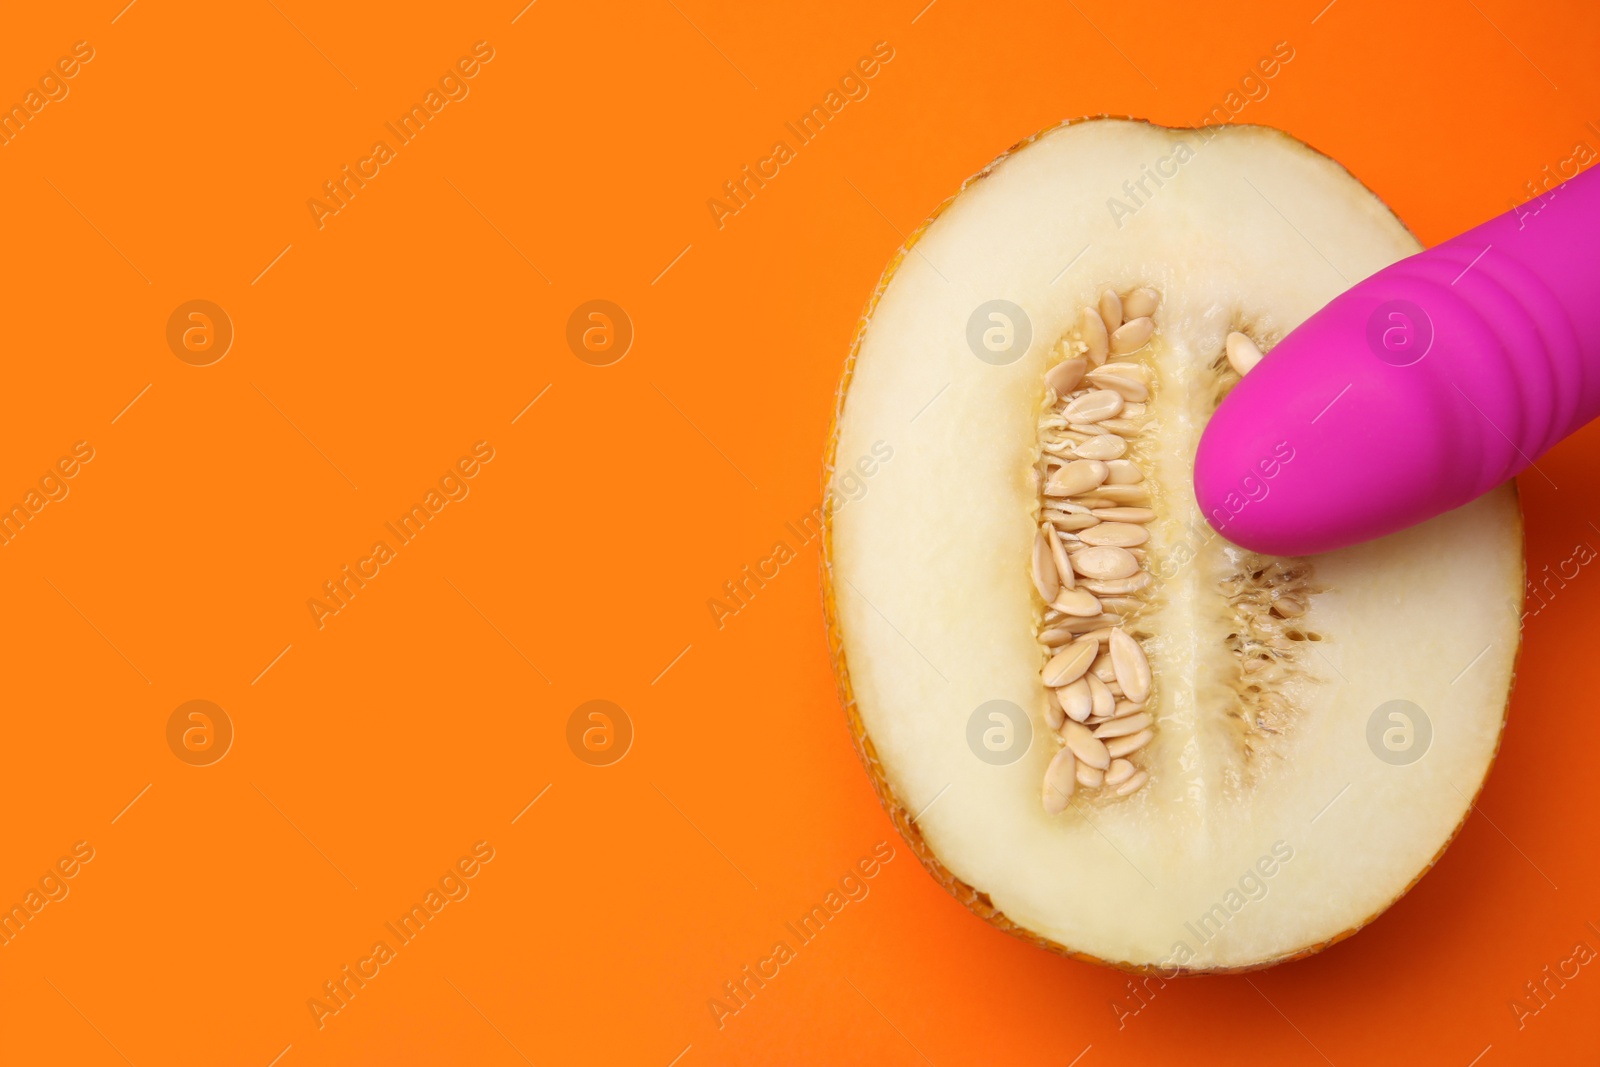 Photo of Half of melon and purple vibrator on orange background, flat lay with space for text. Sex concept